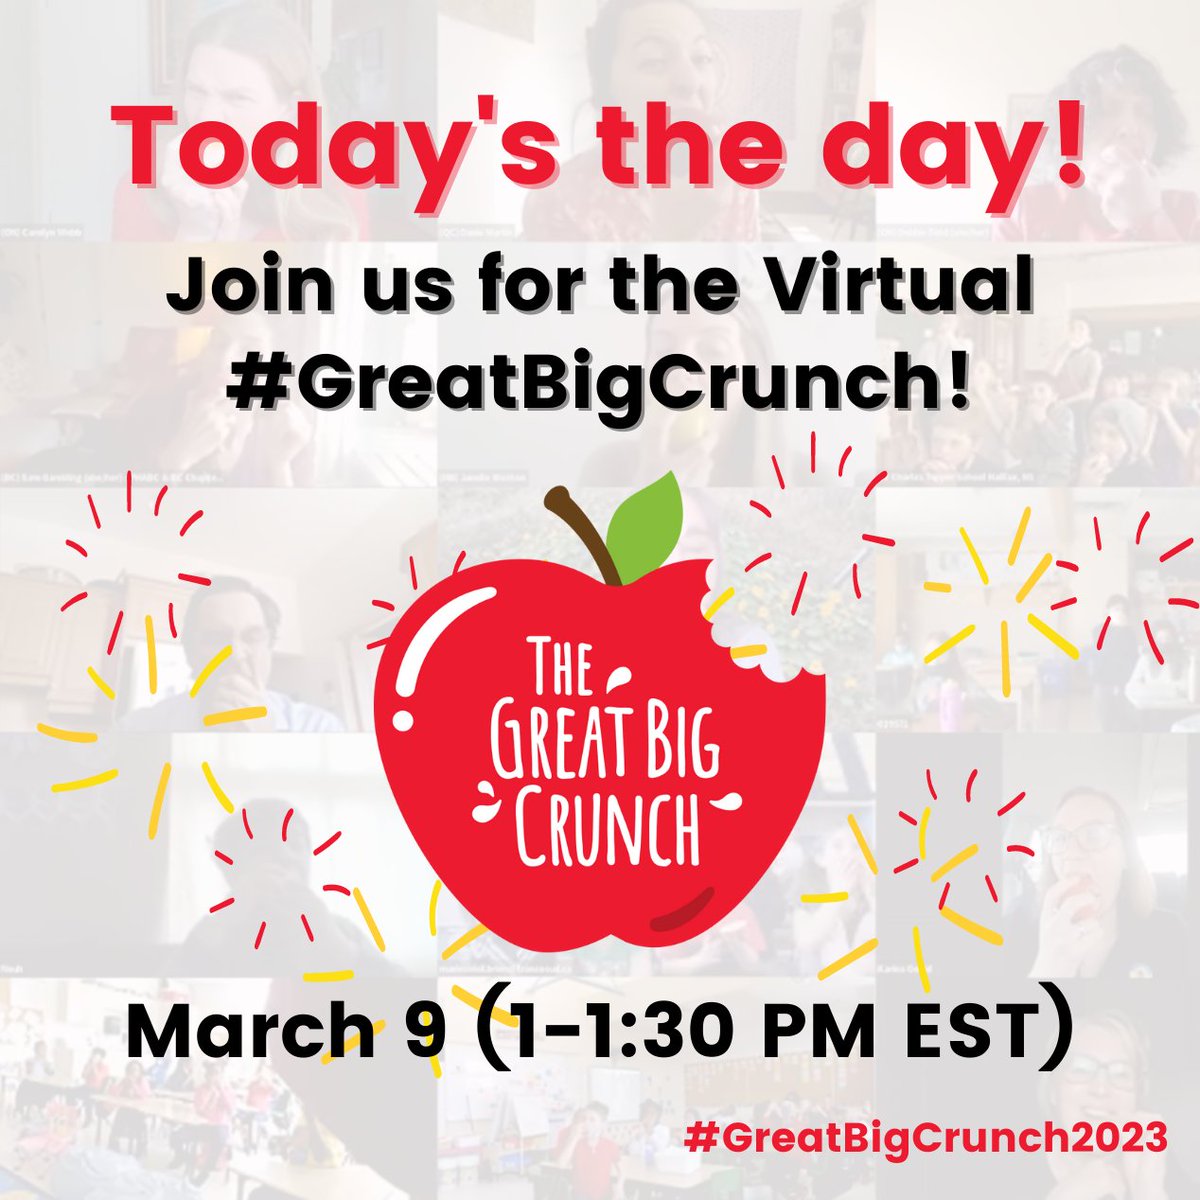 Today's #GreatBigCrunch day! Not signed up yet?
It's not too late to join us at 1pm (ET)! 

Click here (https://t.co/BogYQCvlpo) to sign up and take an enjoyable break during your day to to highlight the importance of healthy food at school. 